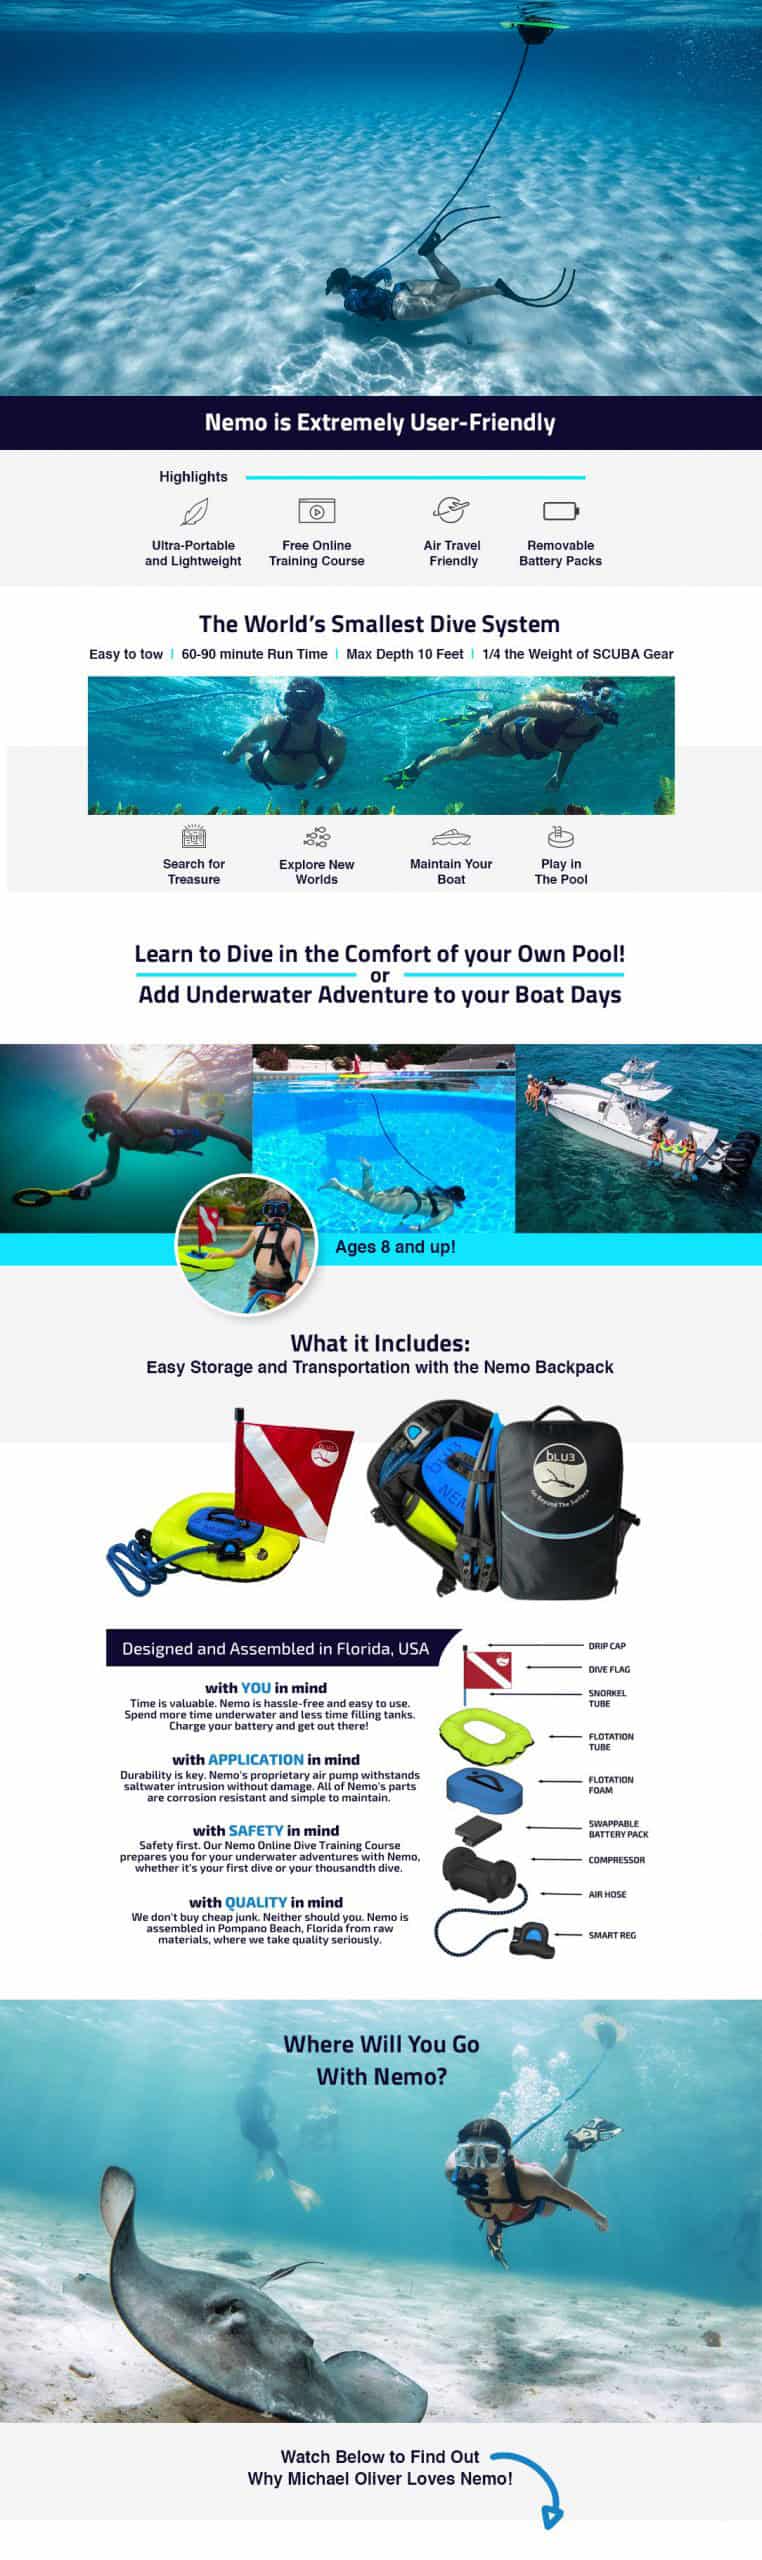 Nemo by BLU3 Worlds Smallest Dive System with backpack